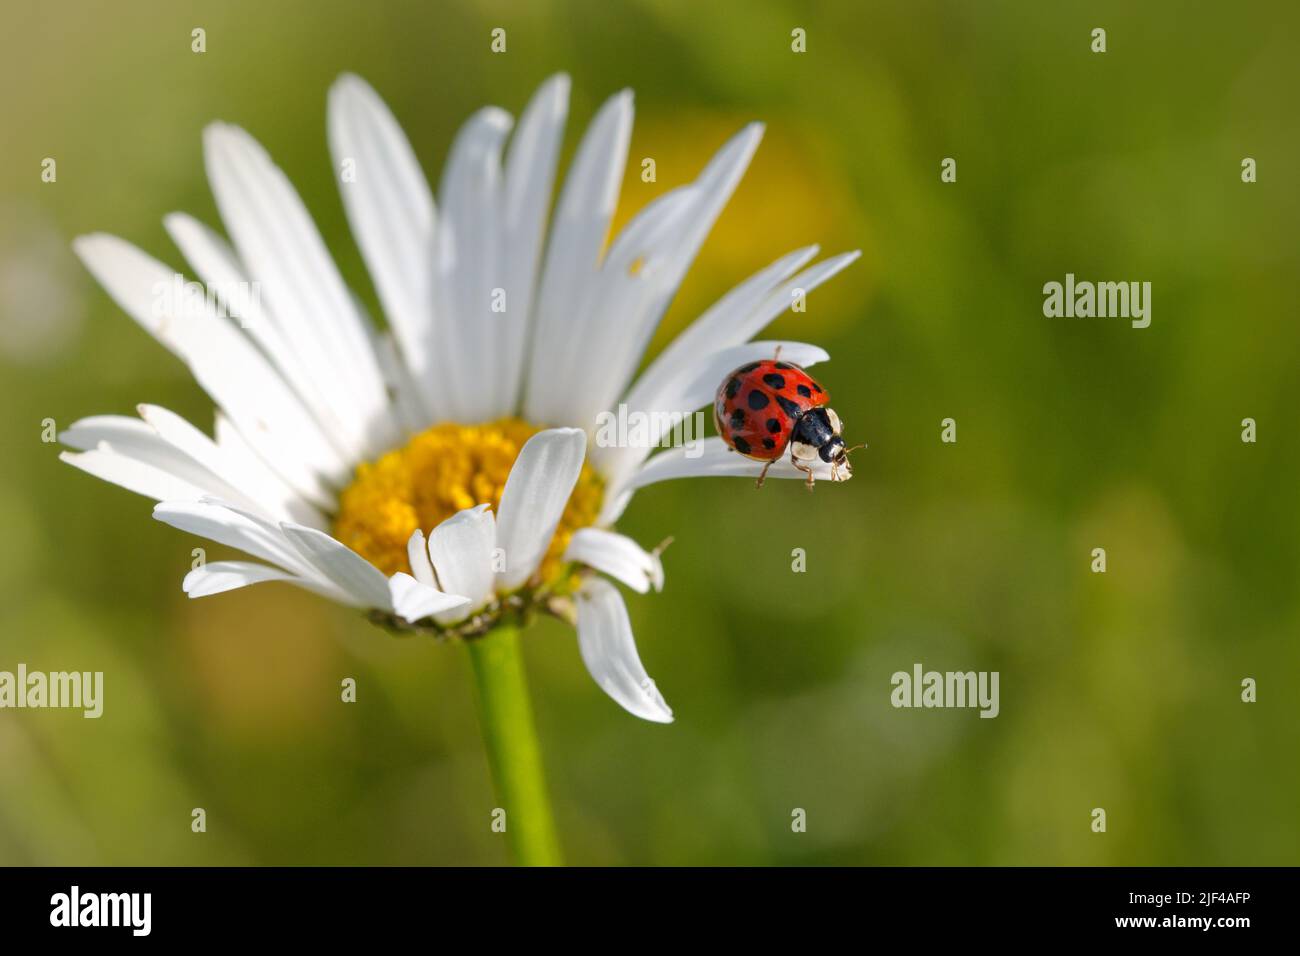 Macro photography of a bug on a white flower in summer, garden flower, wildlife, dots Stock Photo